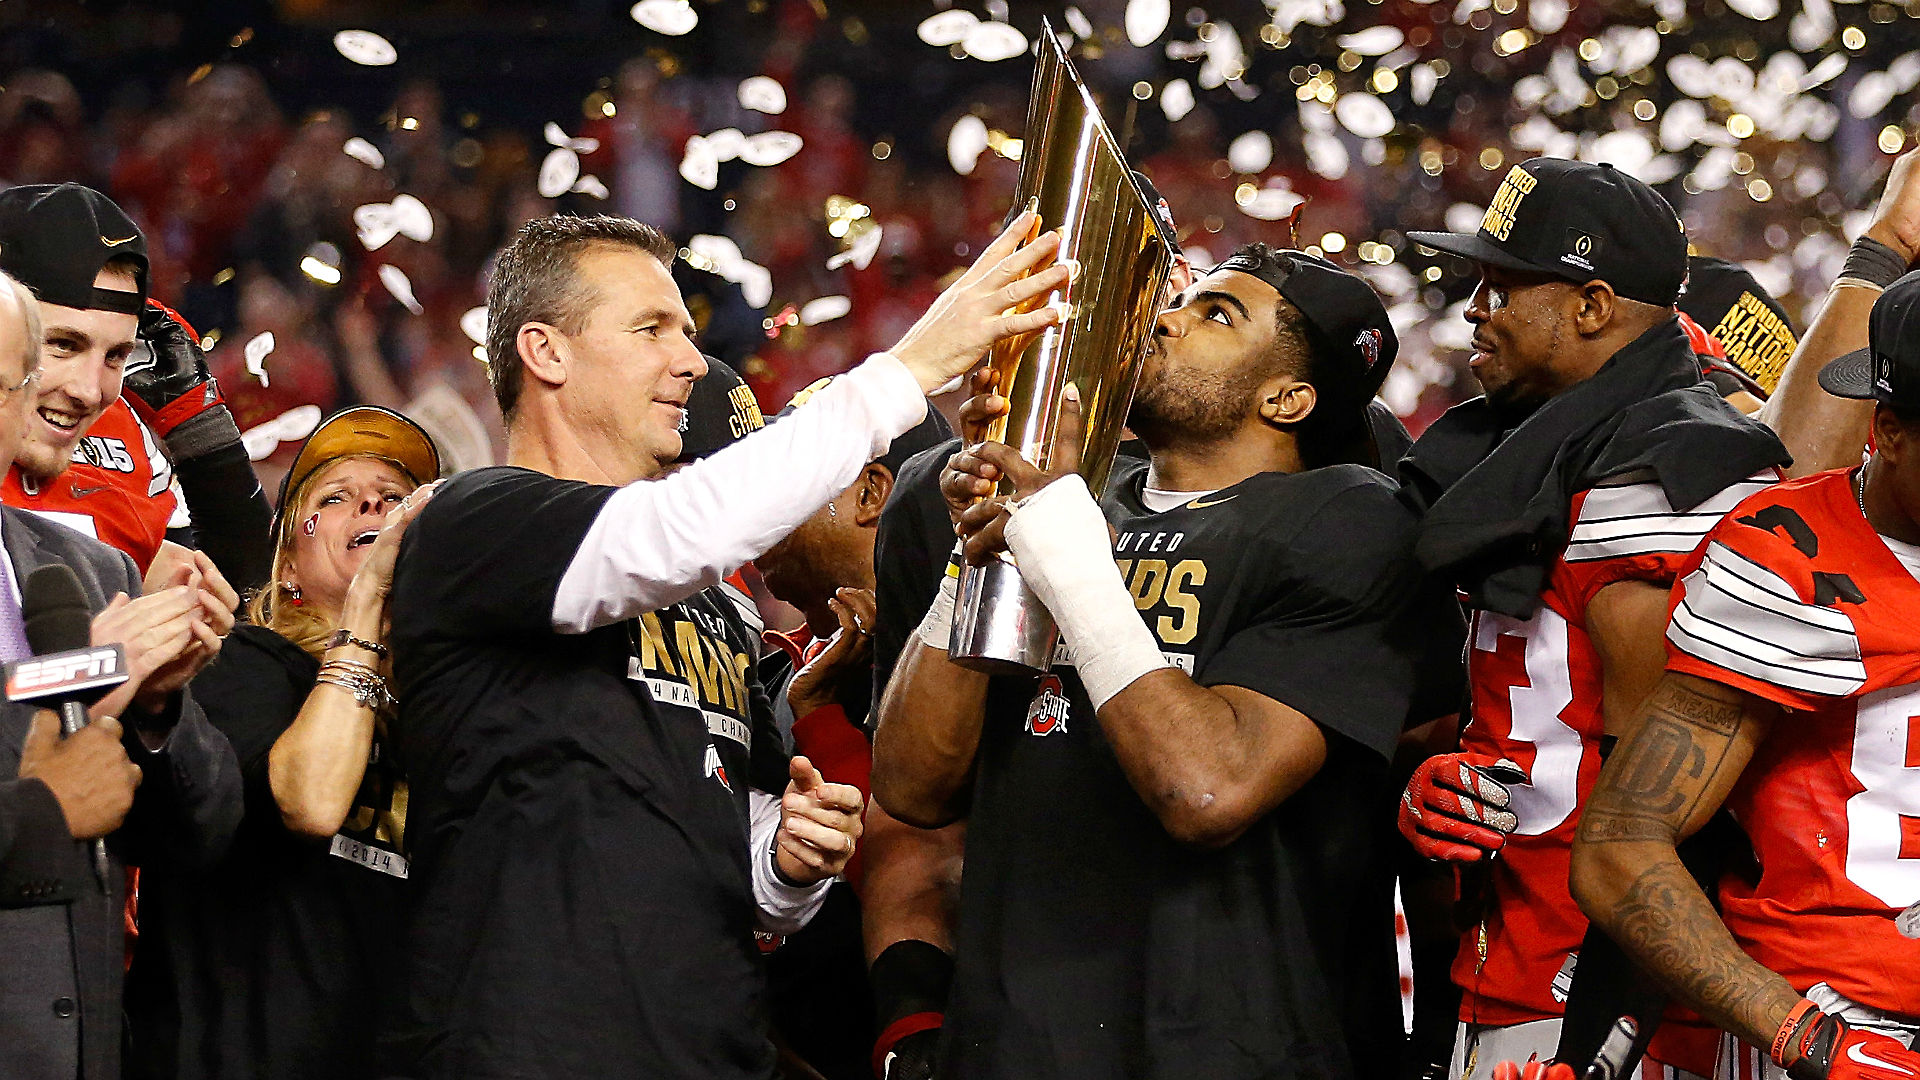 Ohio State Opens As Favorite To Repeat College Football Champions